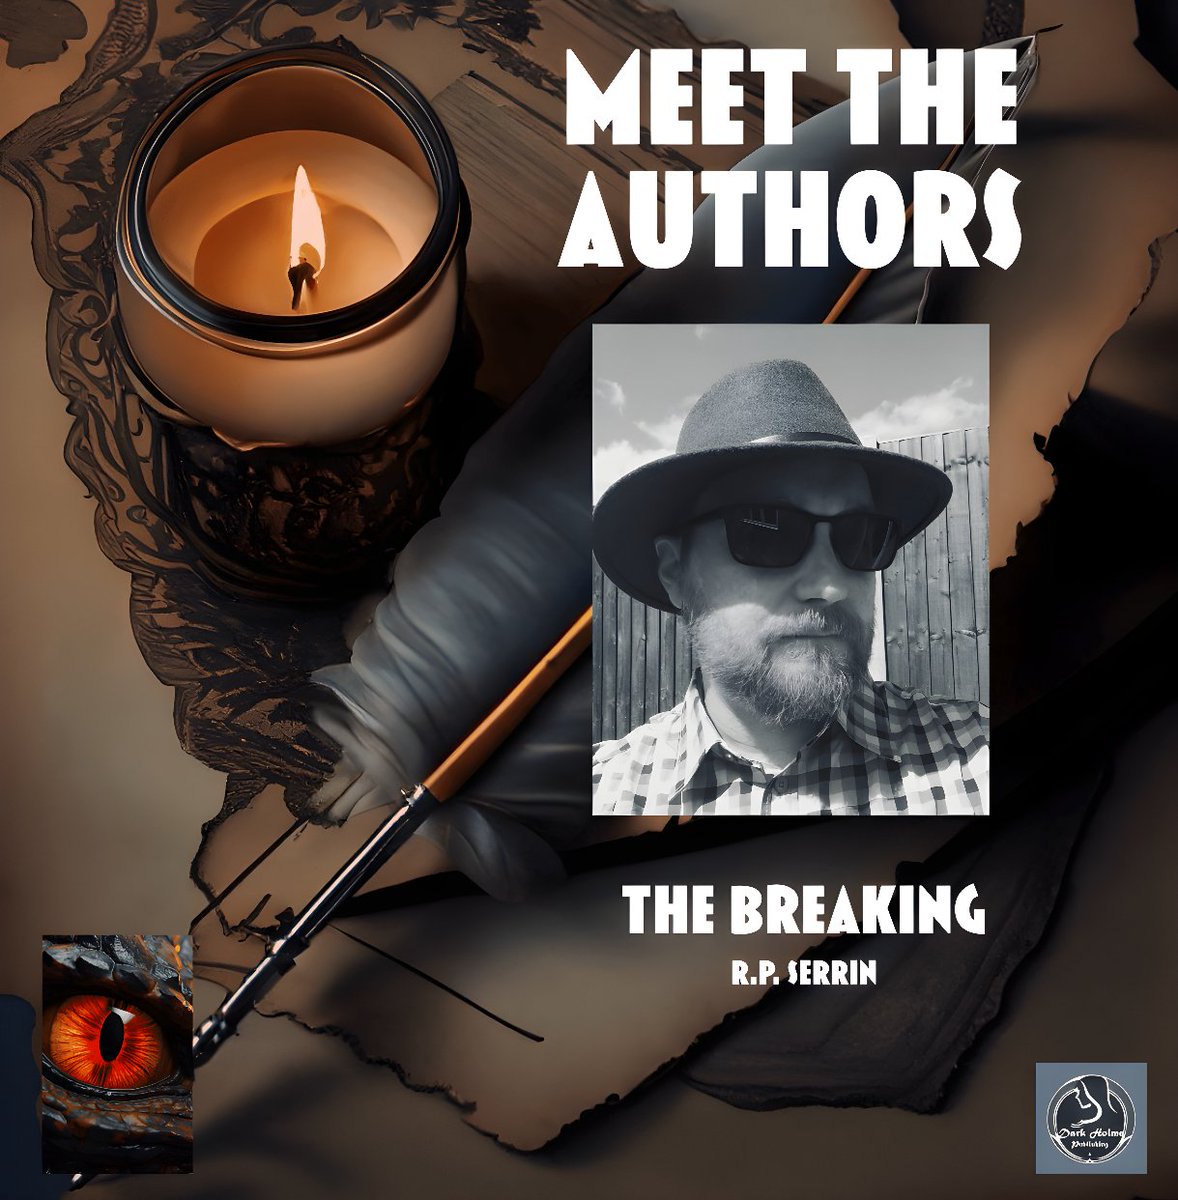 Meet R.P. Serin, born in 1981. NHS ODP for 15+ years, he graduated with honors in History. A member of the Horror Writers Association, his work's featured in various publications, including Nightmares of Strangers Vol II. 📚#readingcommunity #horrorcommunity #darkfantasy